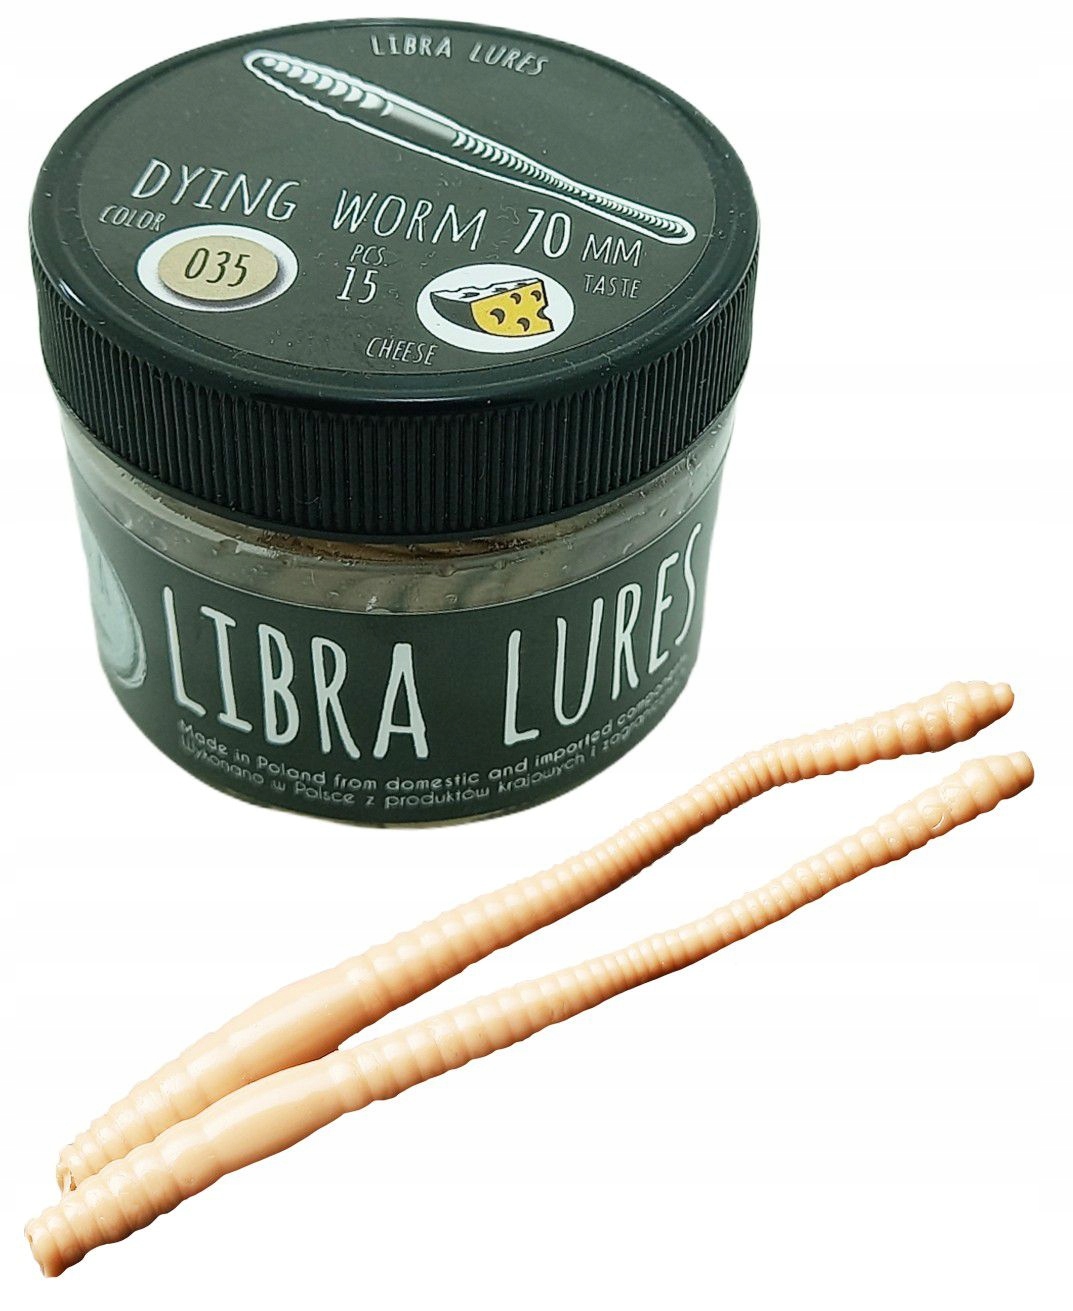 Libra Lures Dying Worm 035 Pellets 7cm Ser - Dying Worm 70mm ser